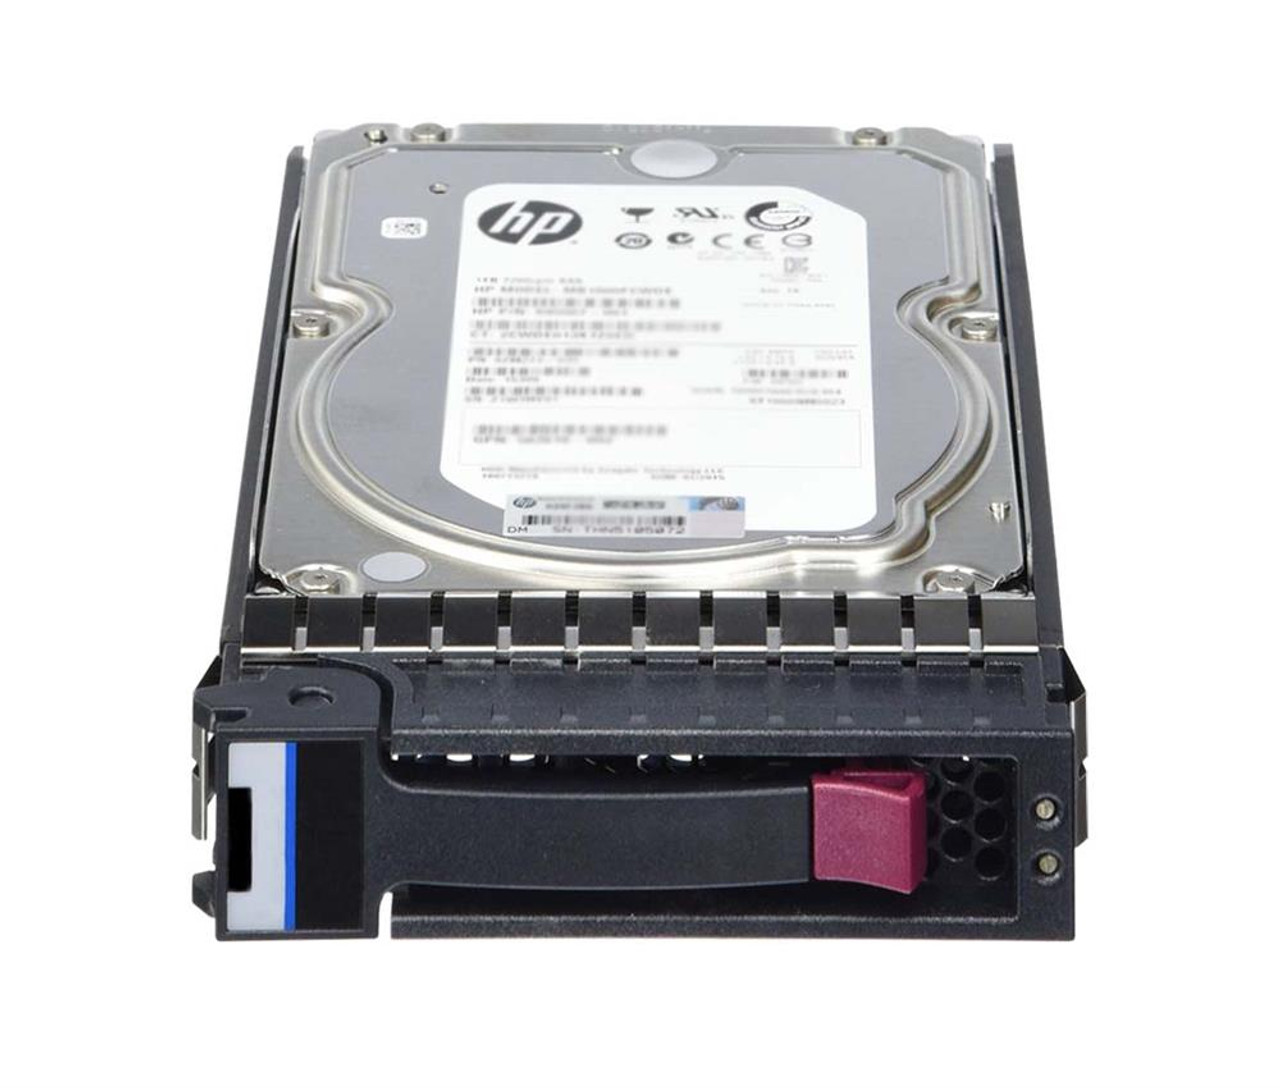 N9X12AS HPE 6TB 7200RPM SAS 12Gbps Midline (512e) 3.5-inch Internal Hard Drive with Tray for StoreVirtual 3000